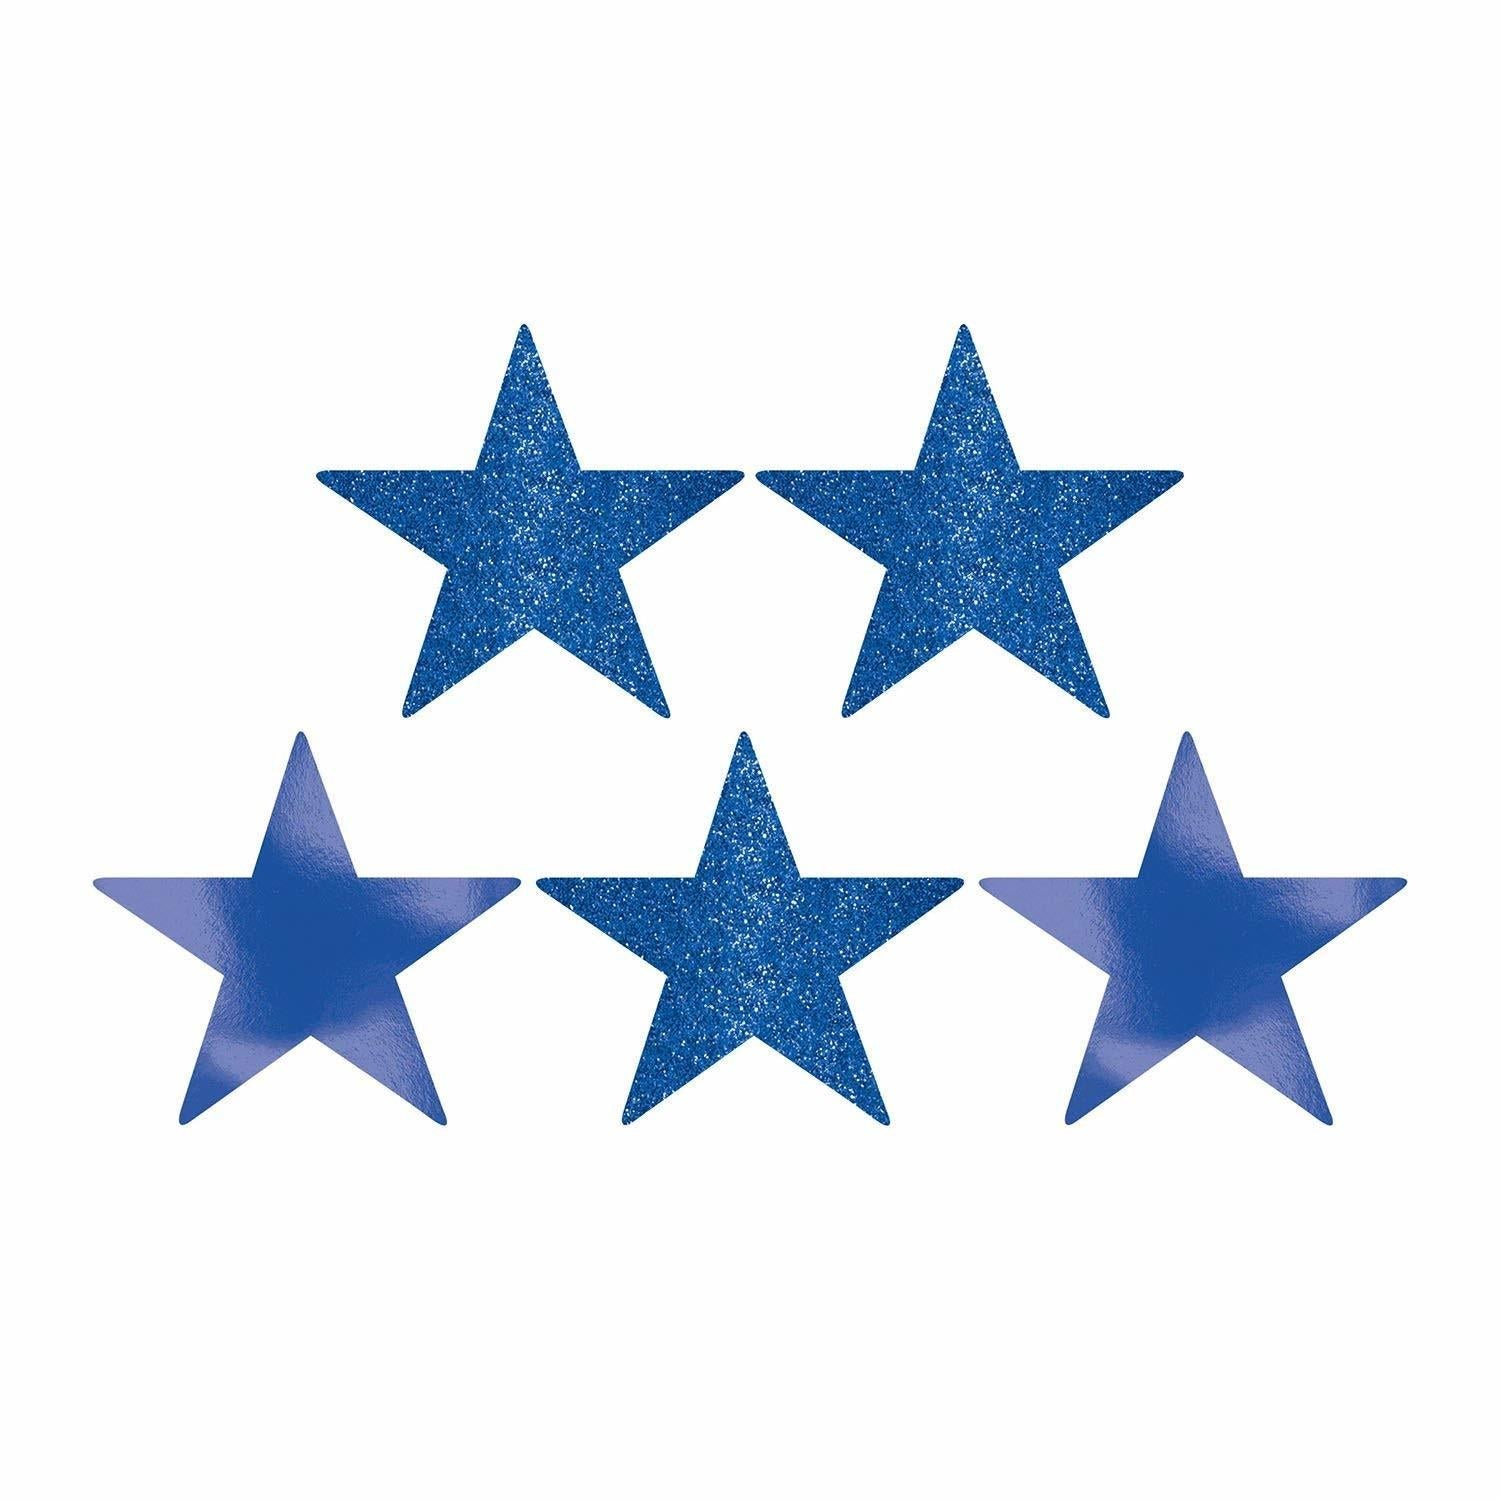 Bright Royal Blue Star Glitter and Foil Cutout 5in 5pcs Decorations - Party Centre